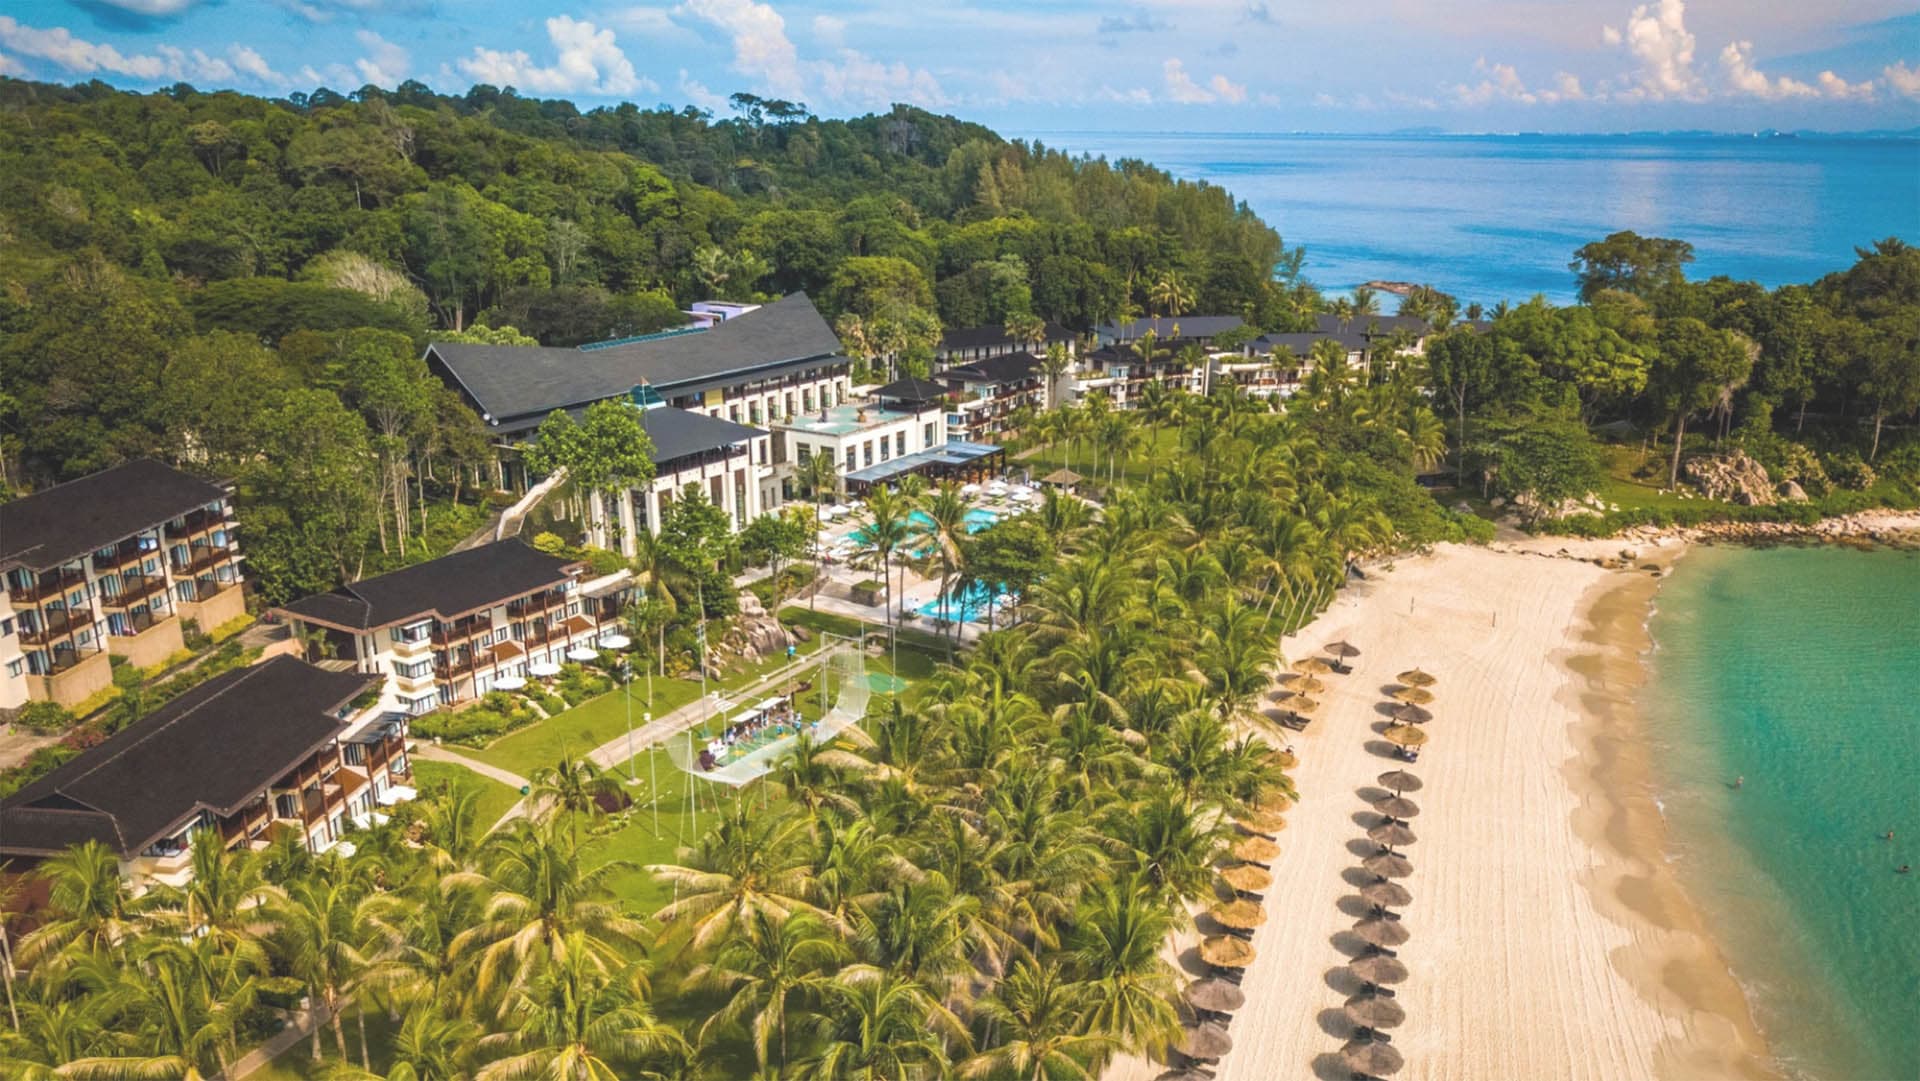 These Are The Resorts You Can Book If You’re Travelling To Bintan Or Batam On The Travel Bubble & VTL